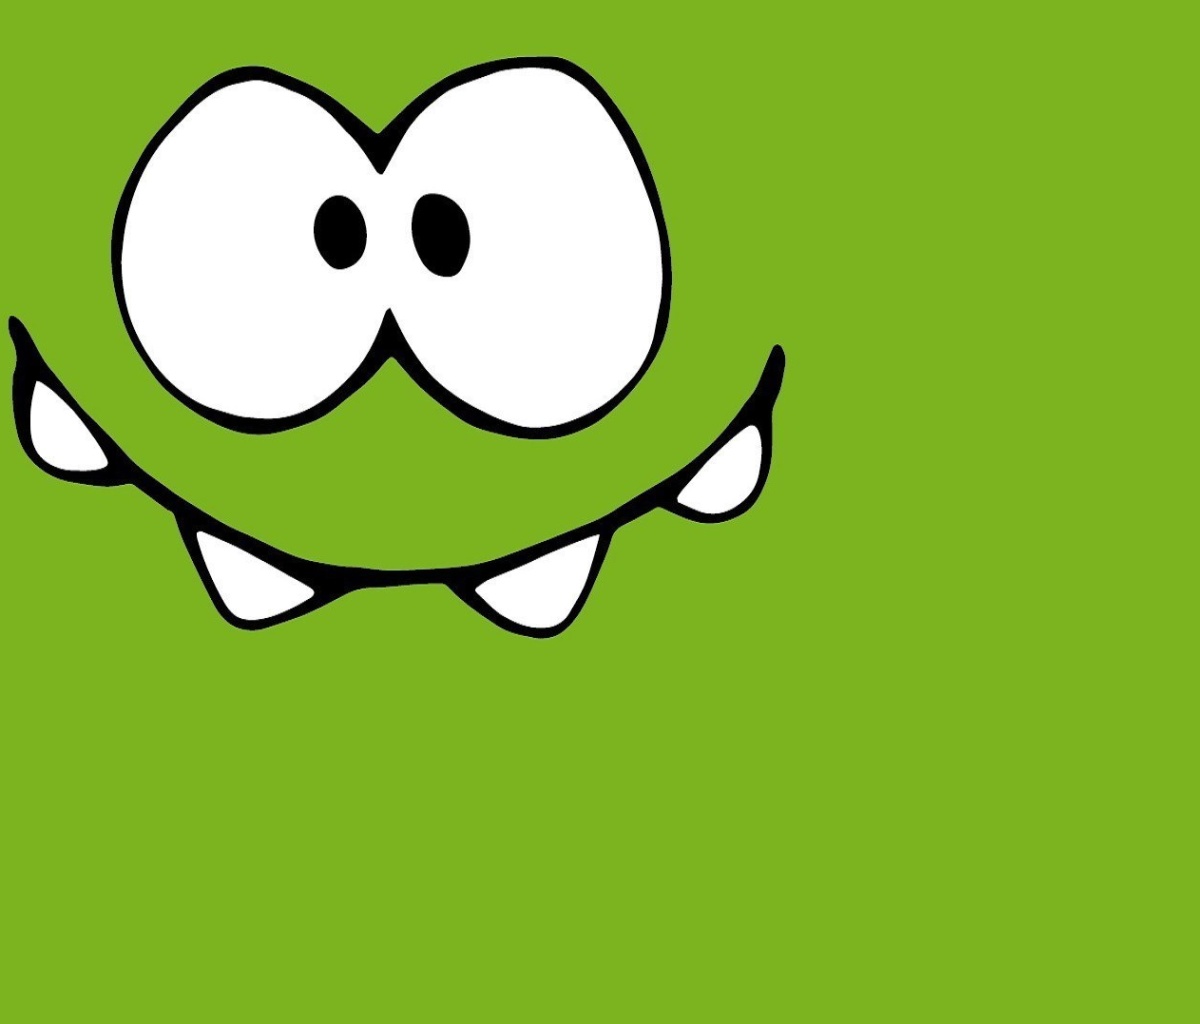 Om Nom from game Cut the Rope wallpaper 1200x1024